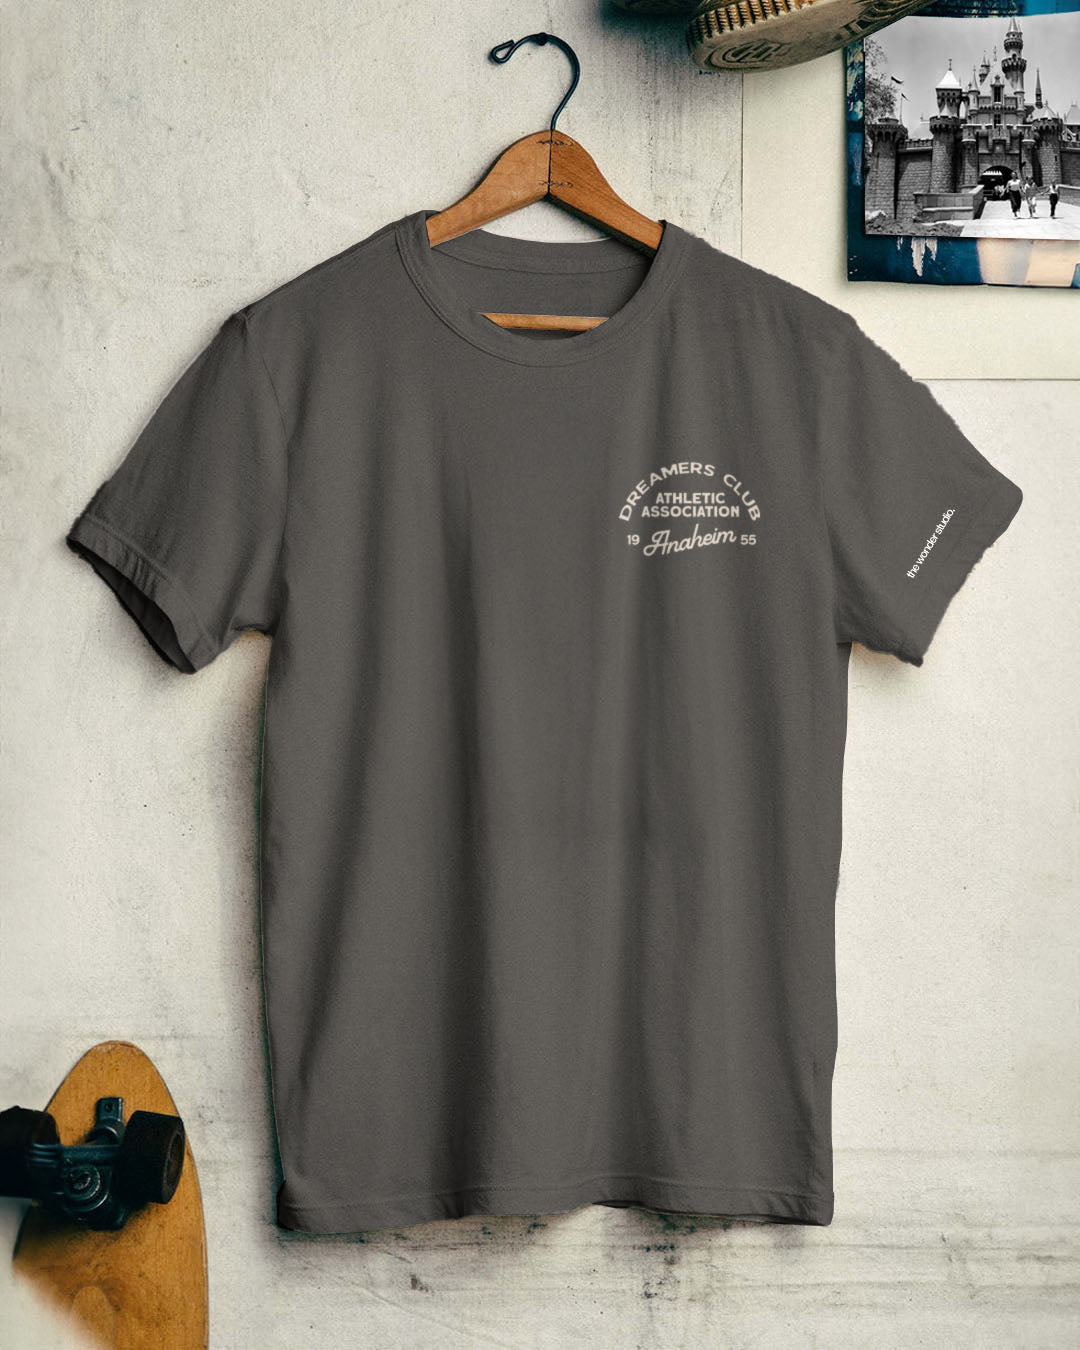 The Dreamers Tee